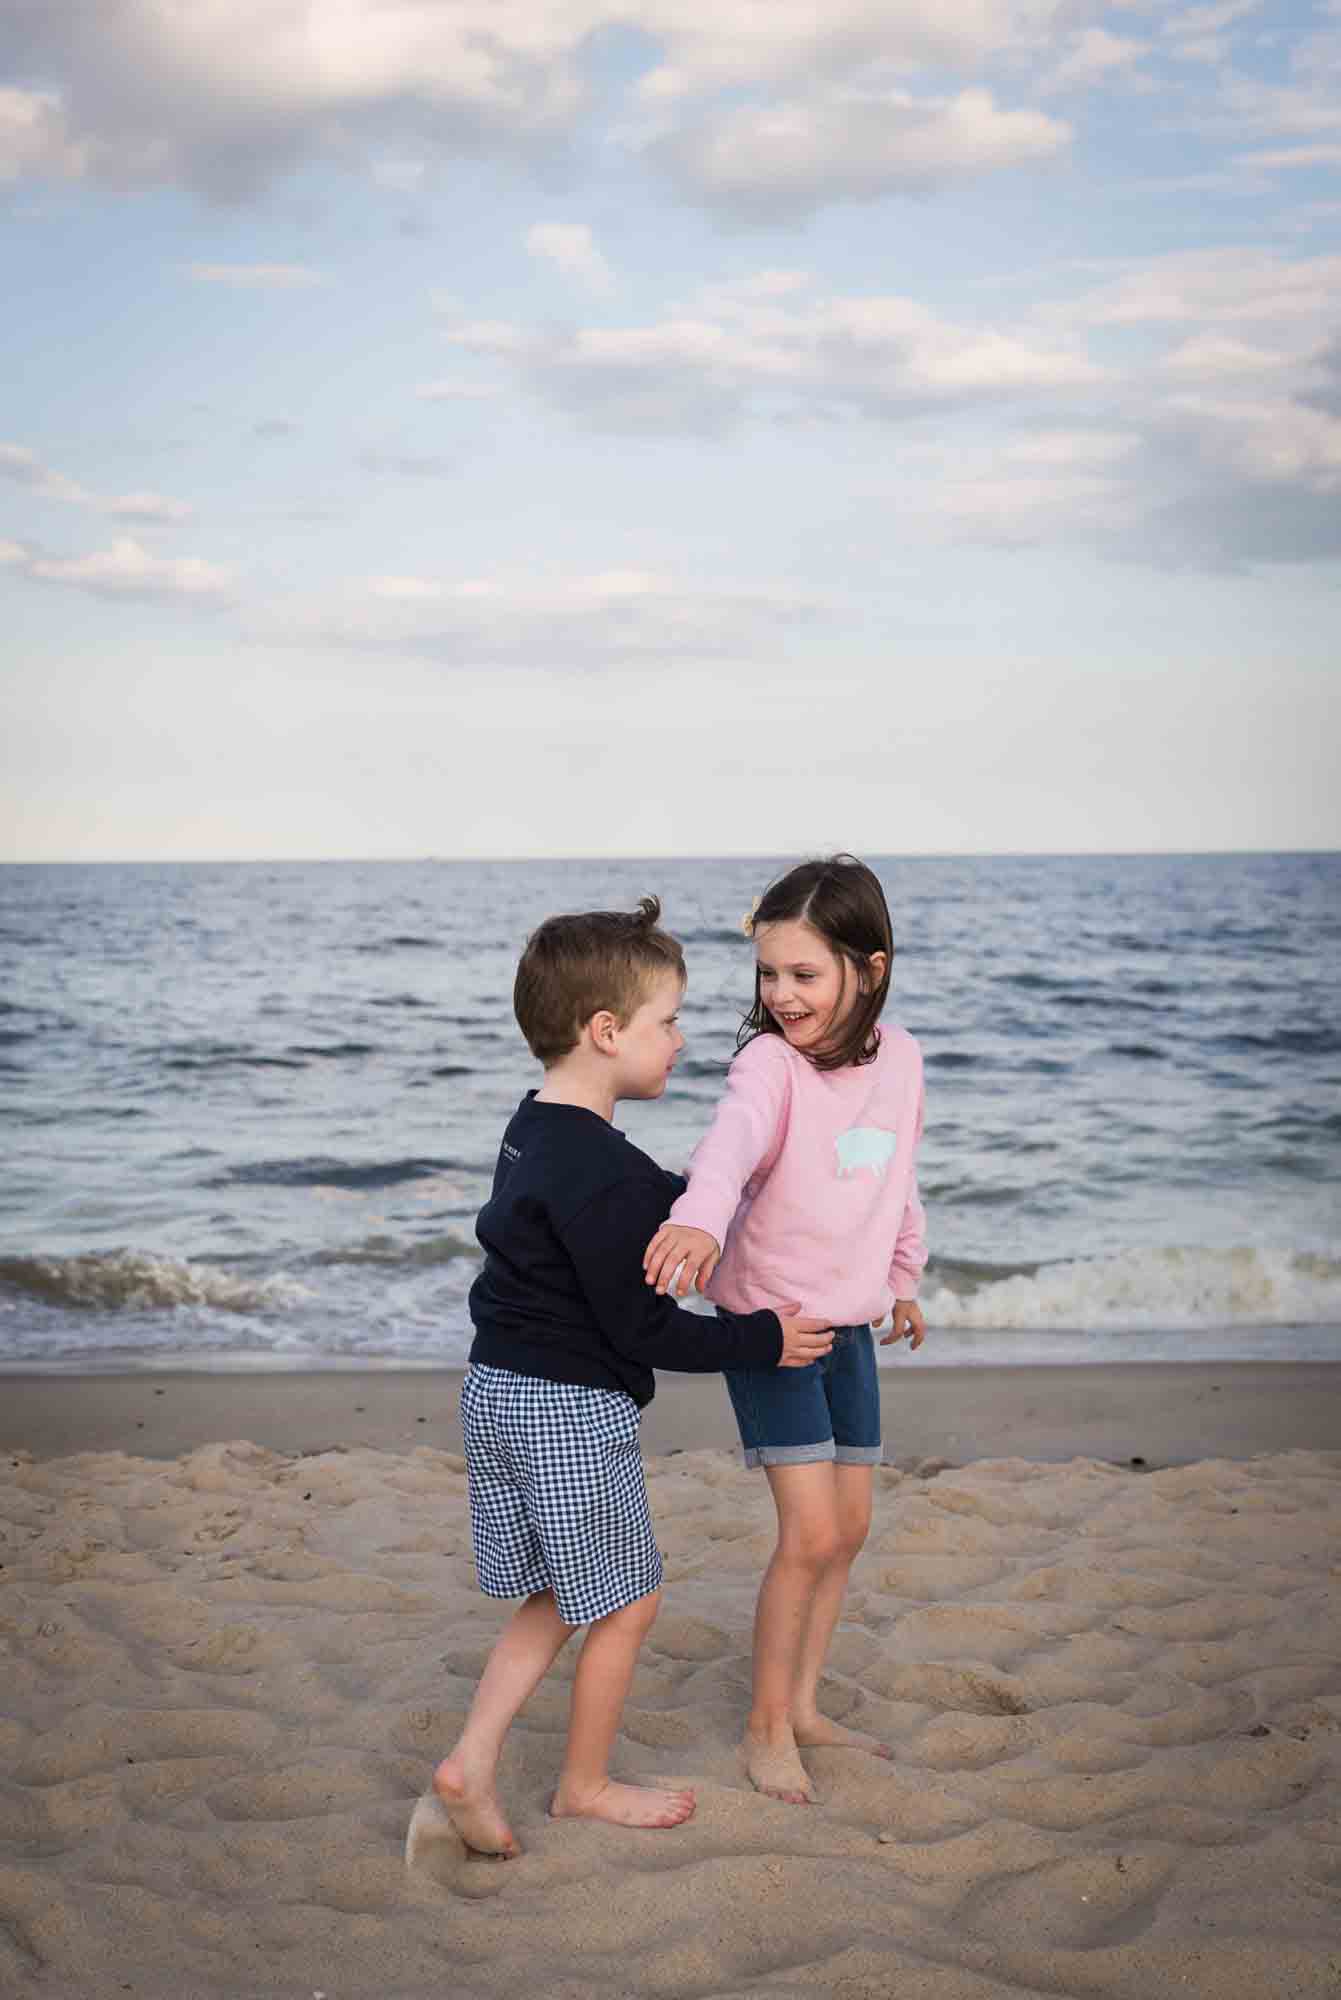 Little boy lifting up little girl on beach in front of ocean